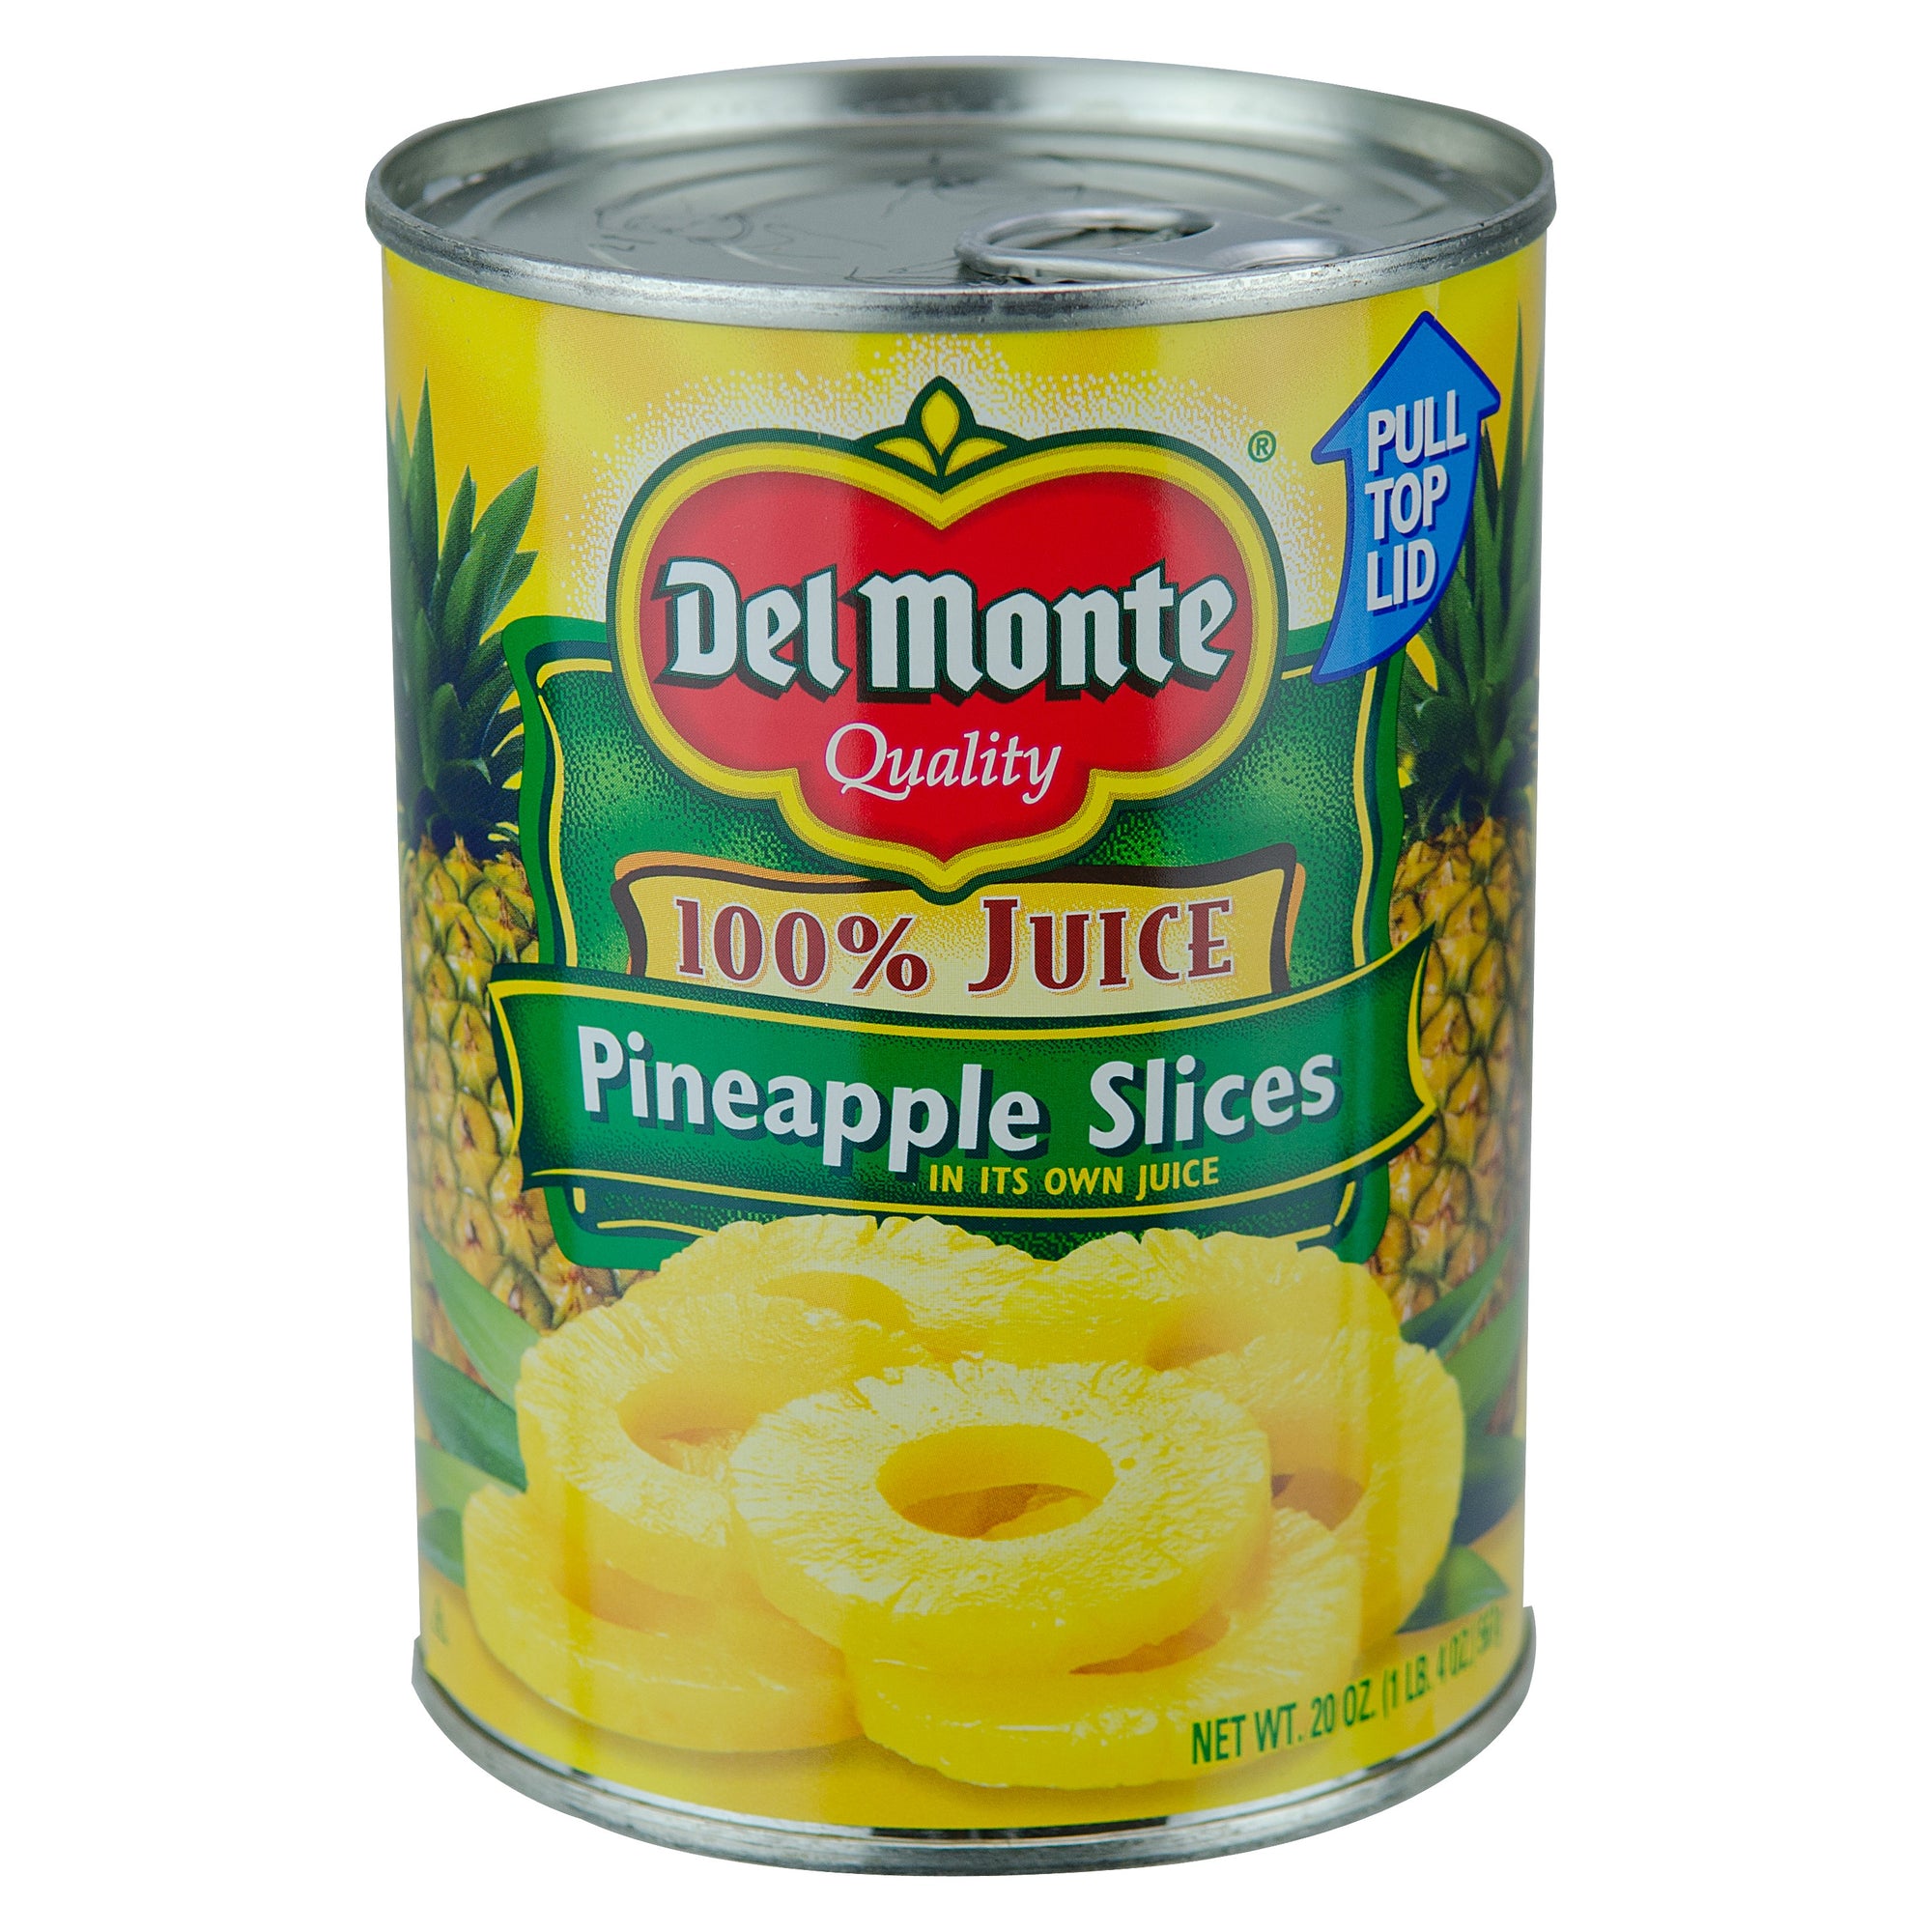 Del Monte(R) Pineapple Slices in 100% Juice 12/20 oz. Can